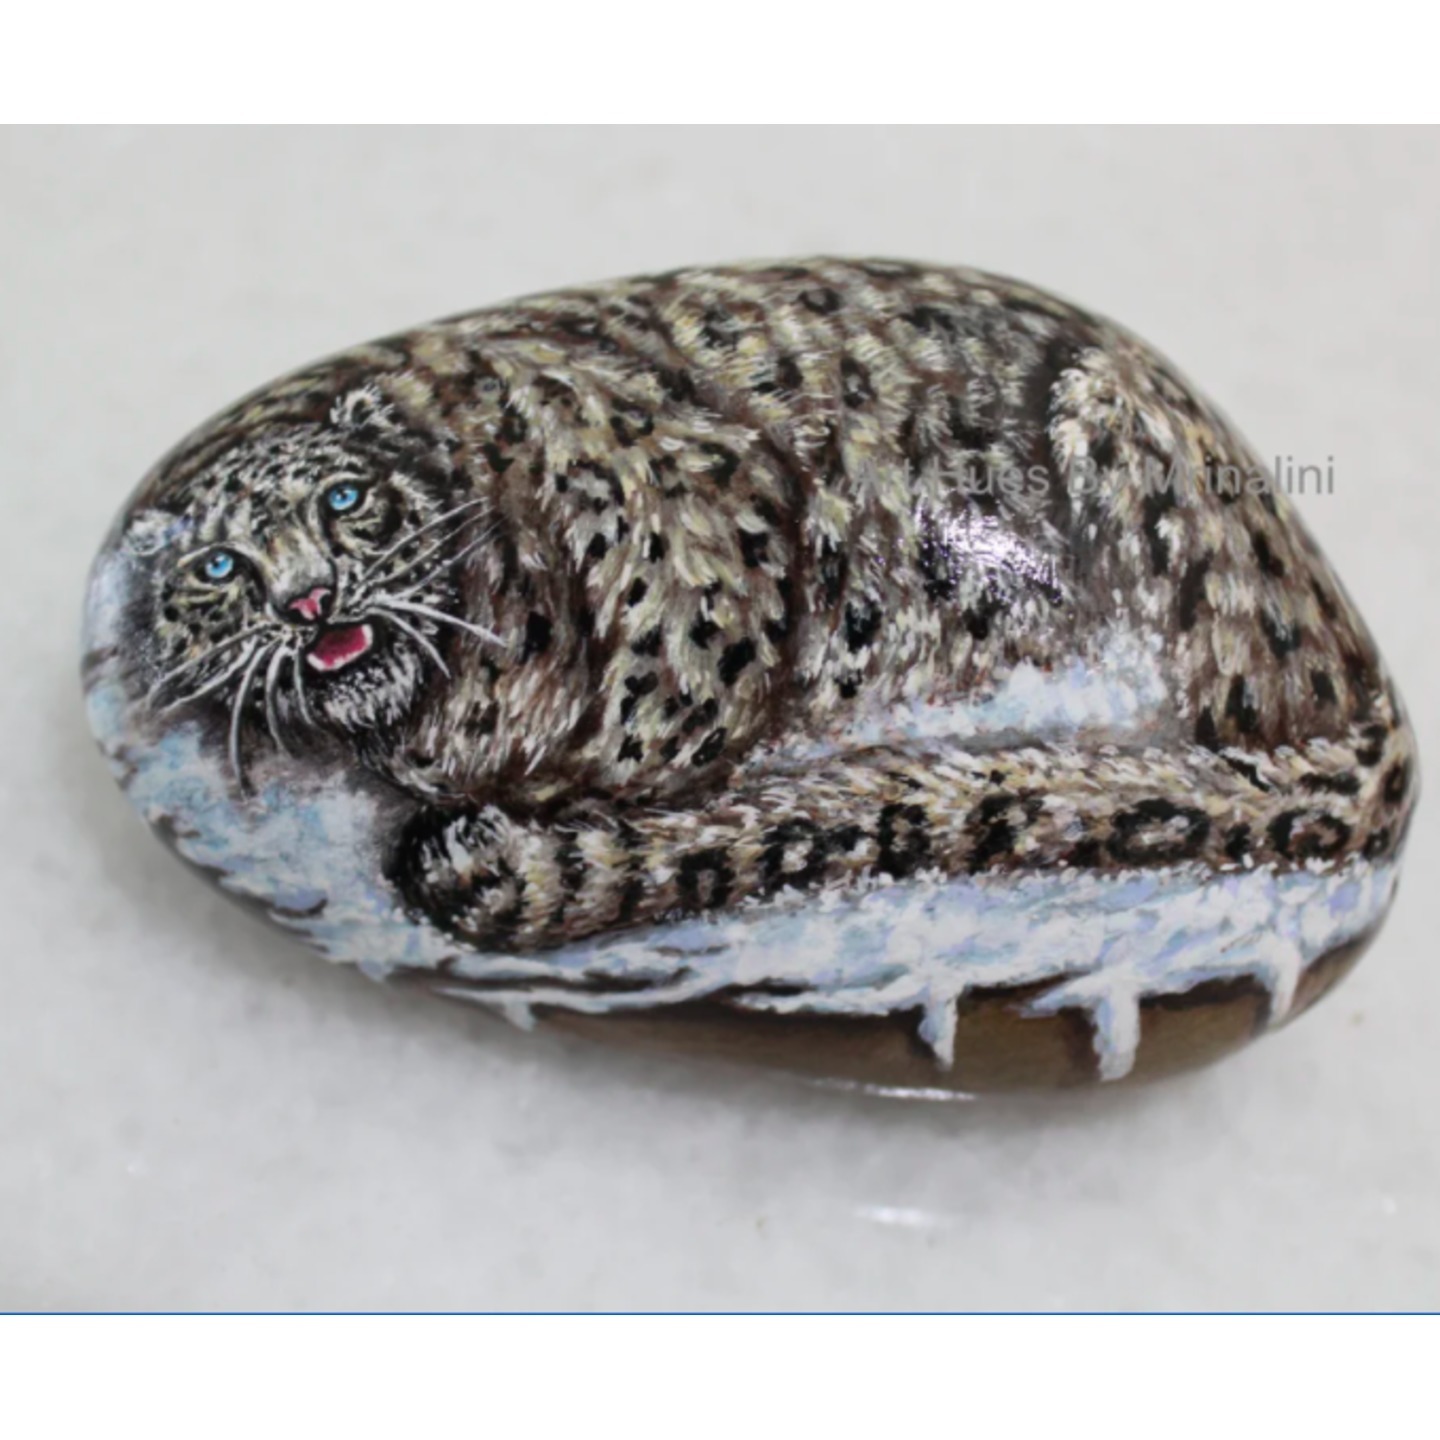 Snow Leopard Hand Painted rock for wildlife lovers